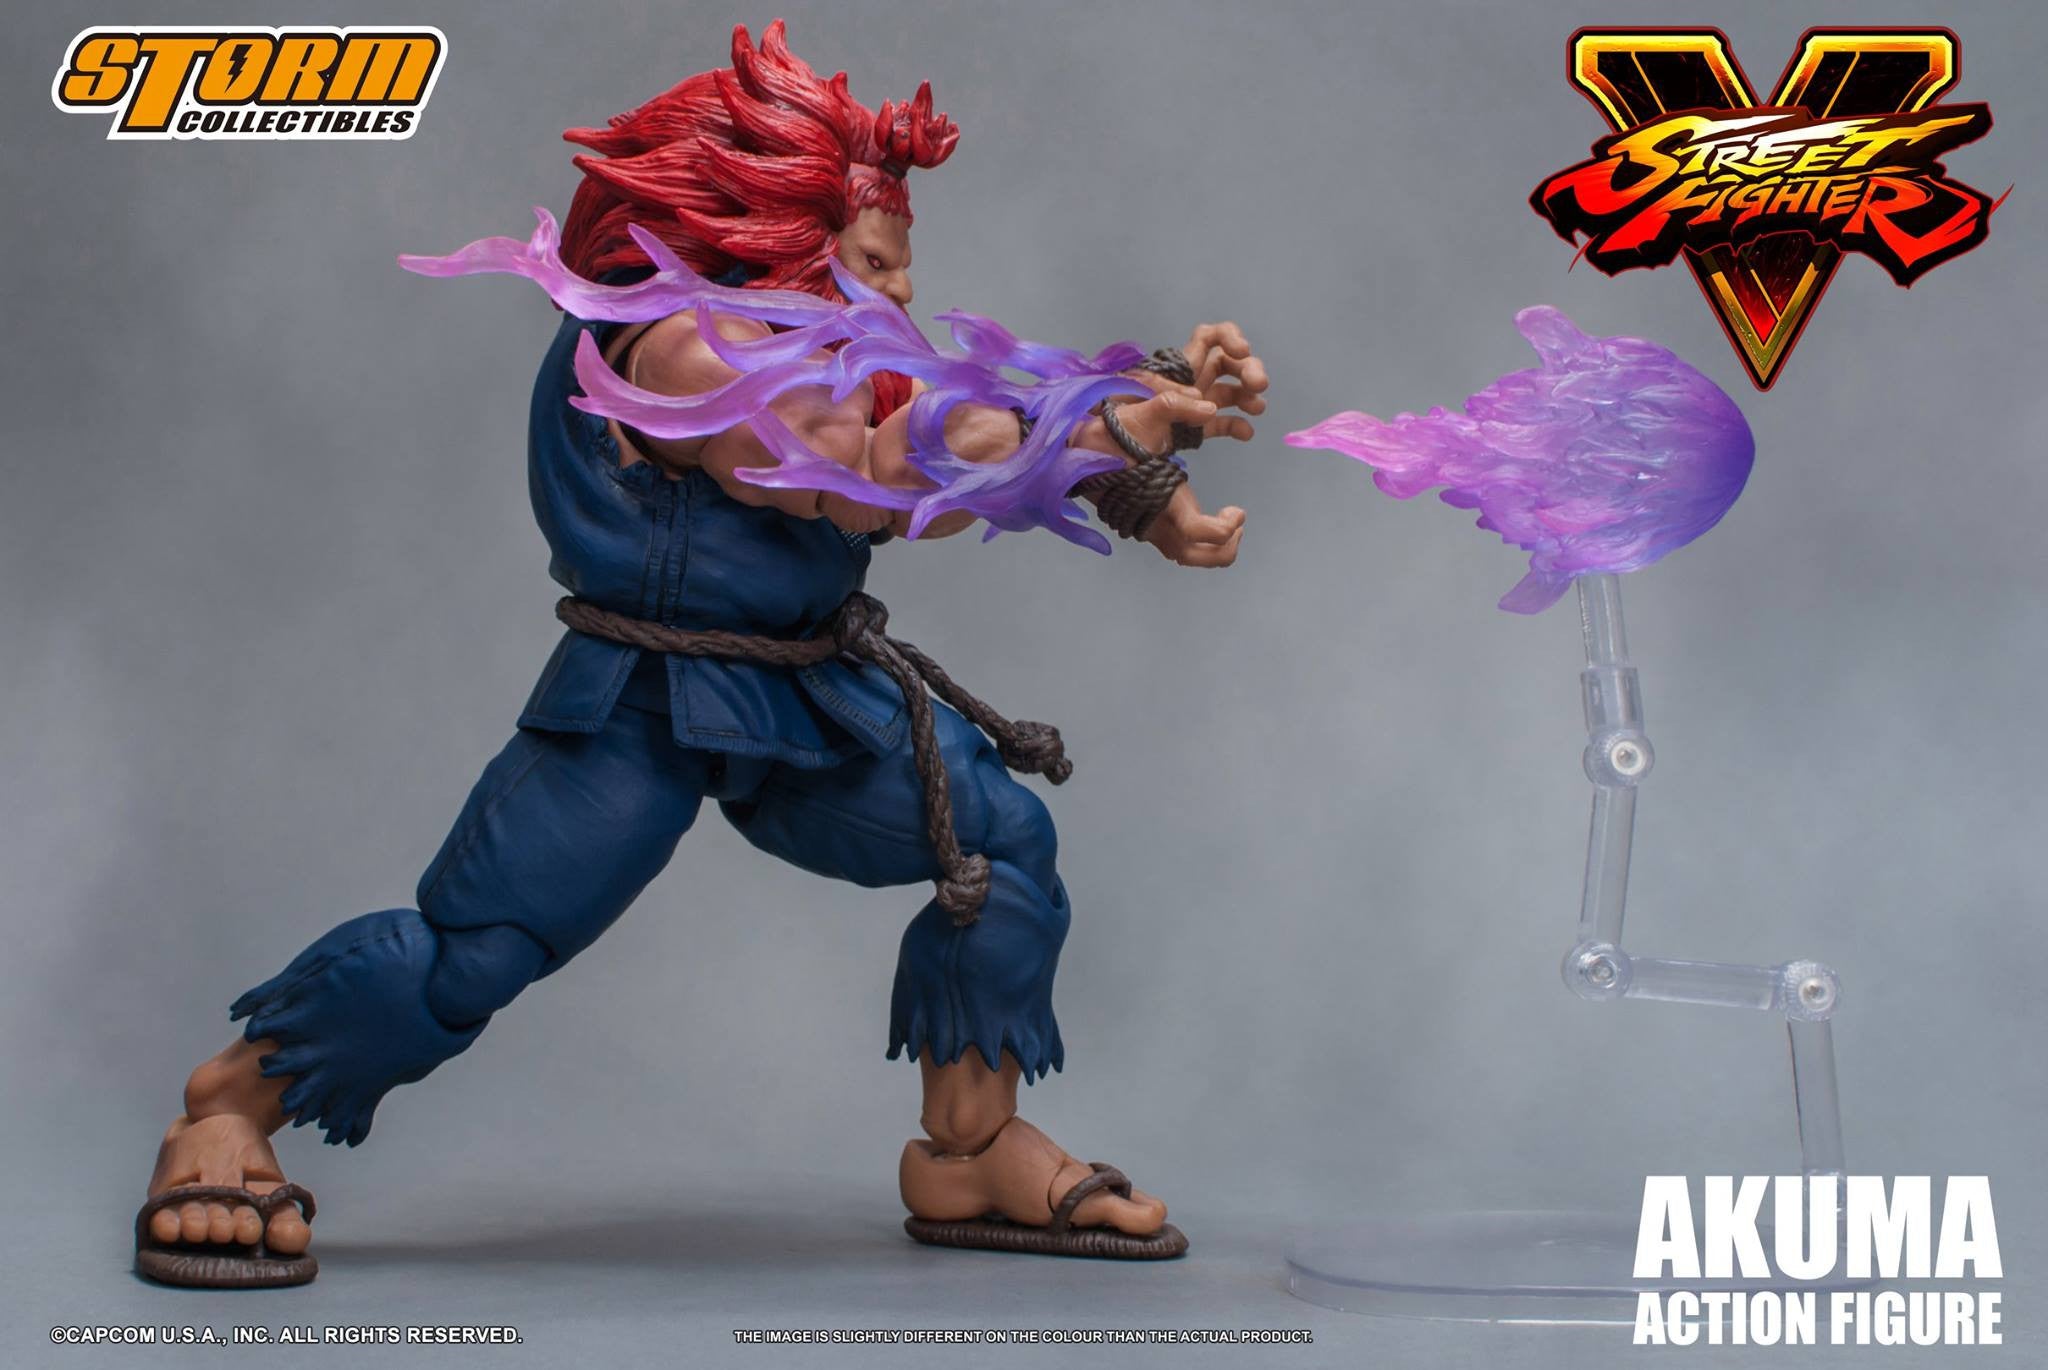 Storm Collectibles - 1:12 Scale Action Figure - Street Fighter V - Akuma - Marvelous Toys